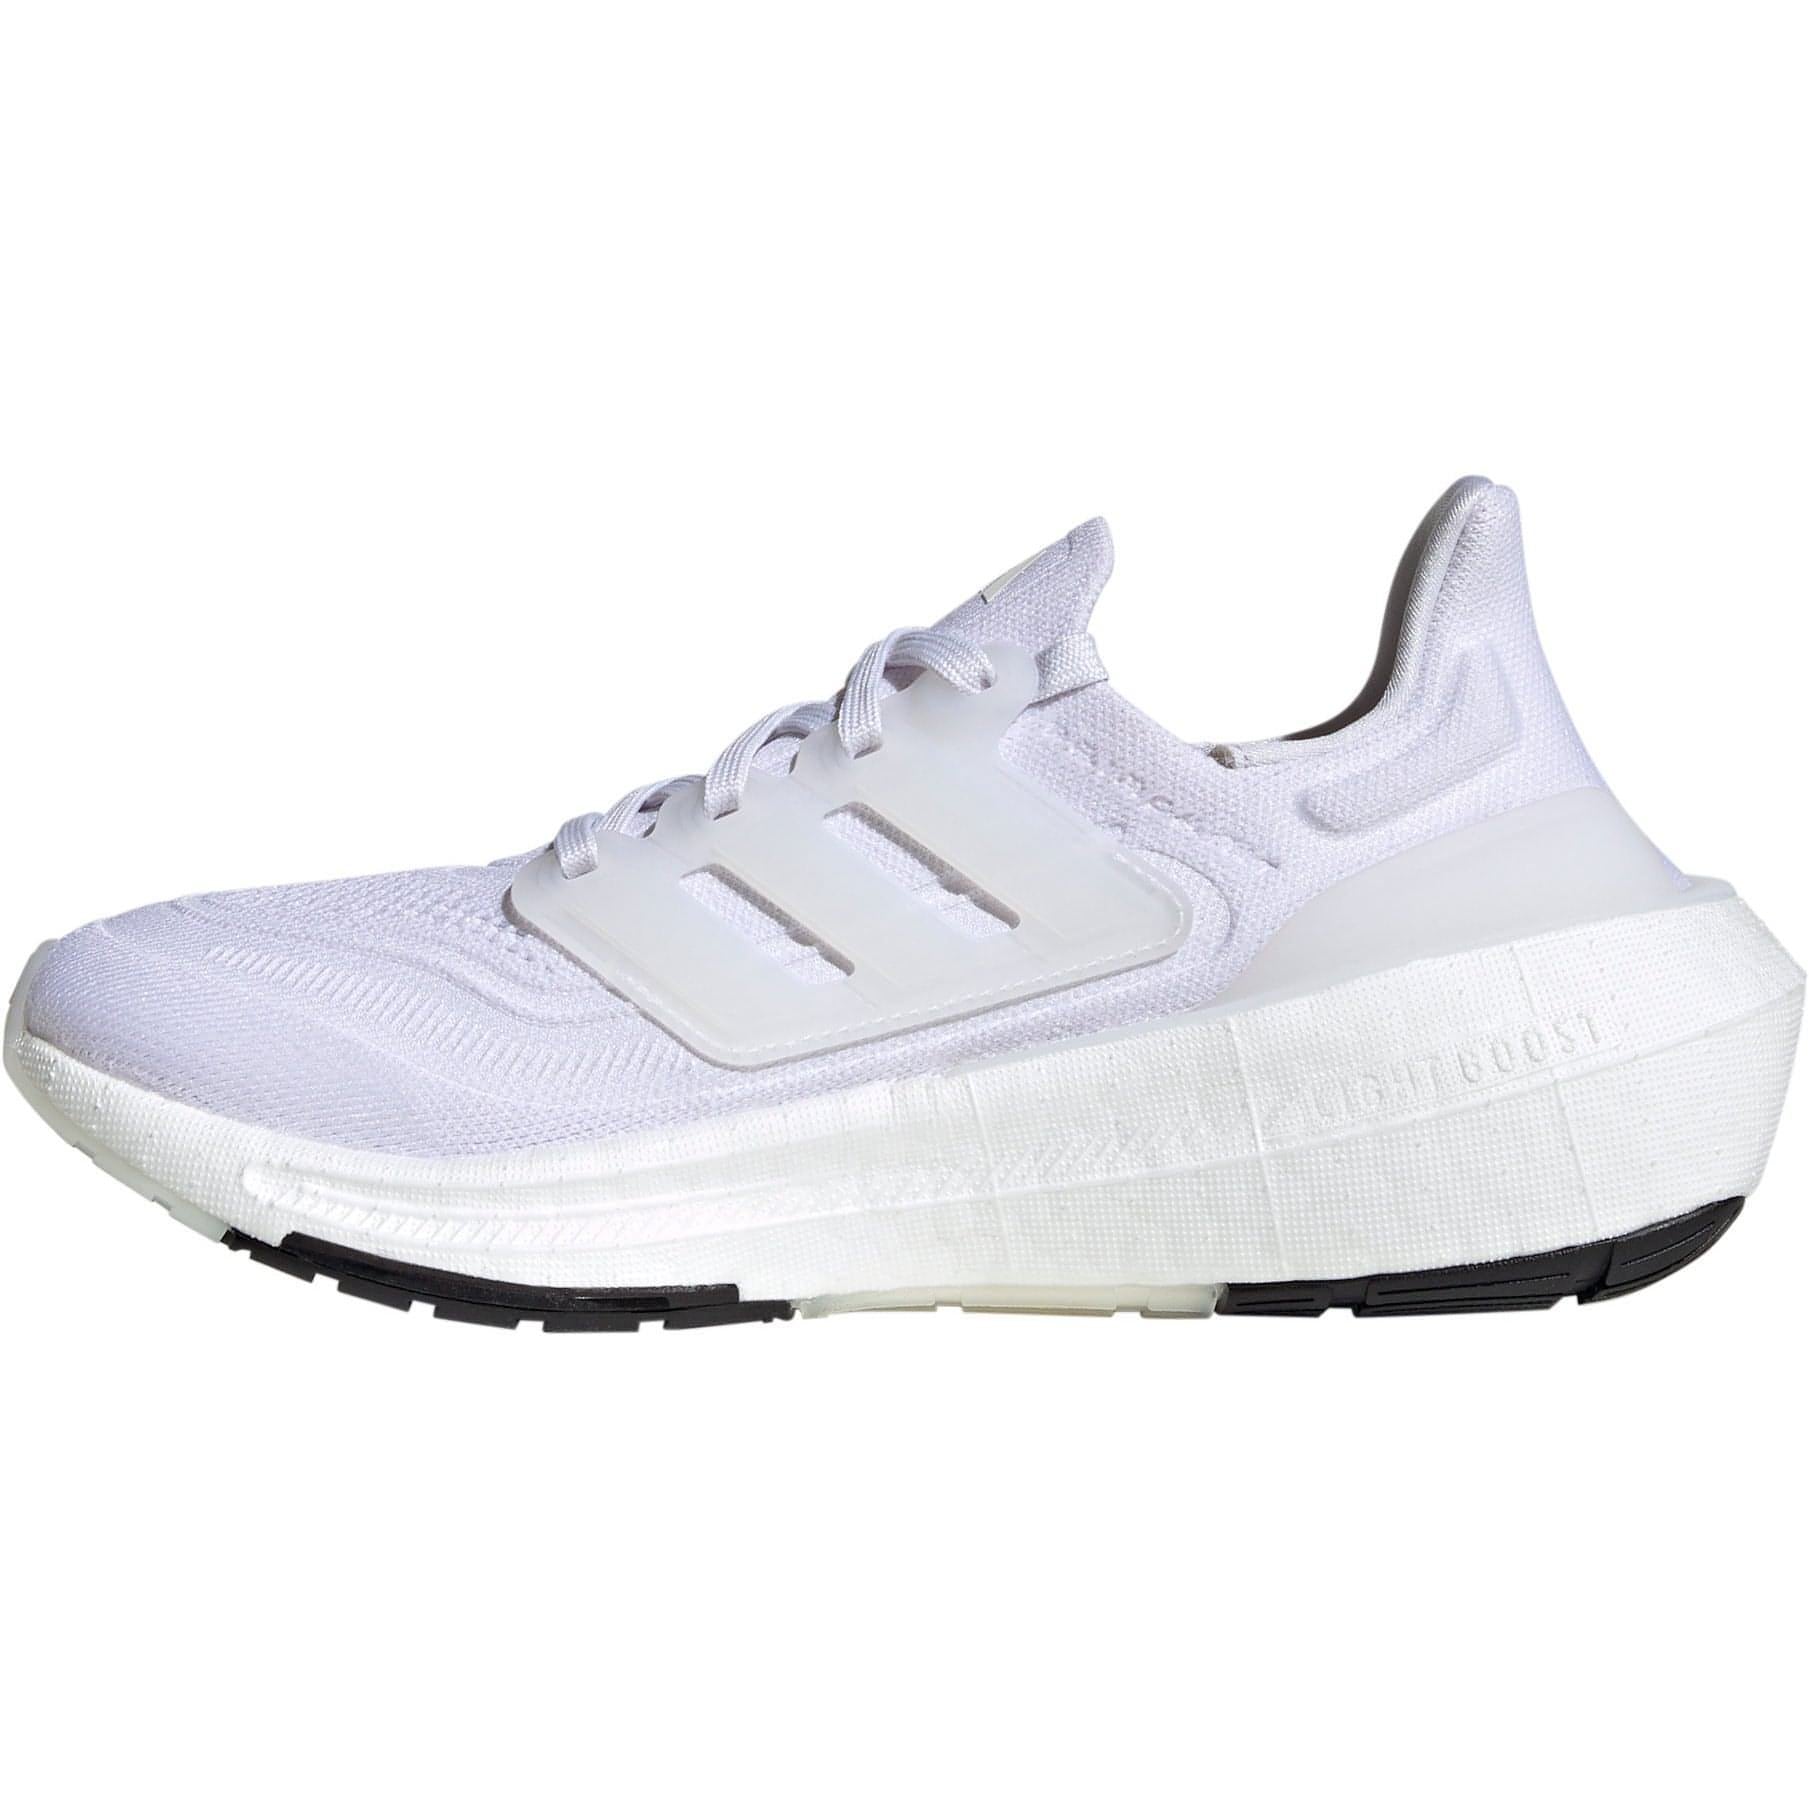 Adidas Ultra Boost Light Gy9352 Inside - Side View